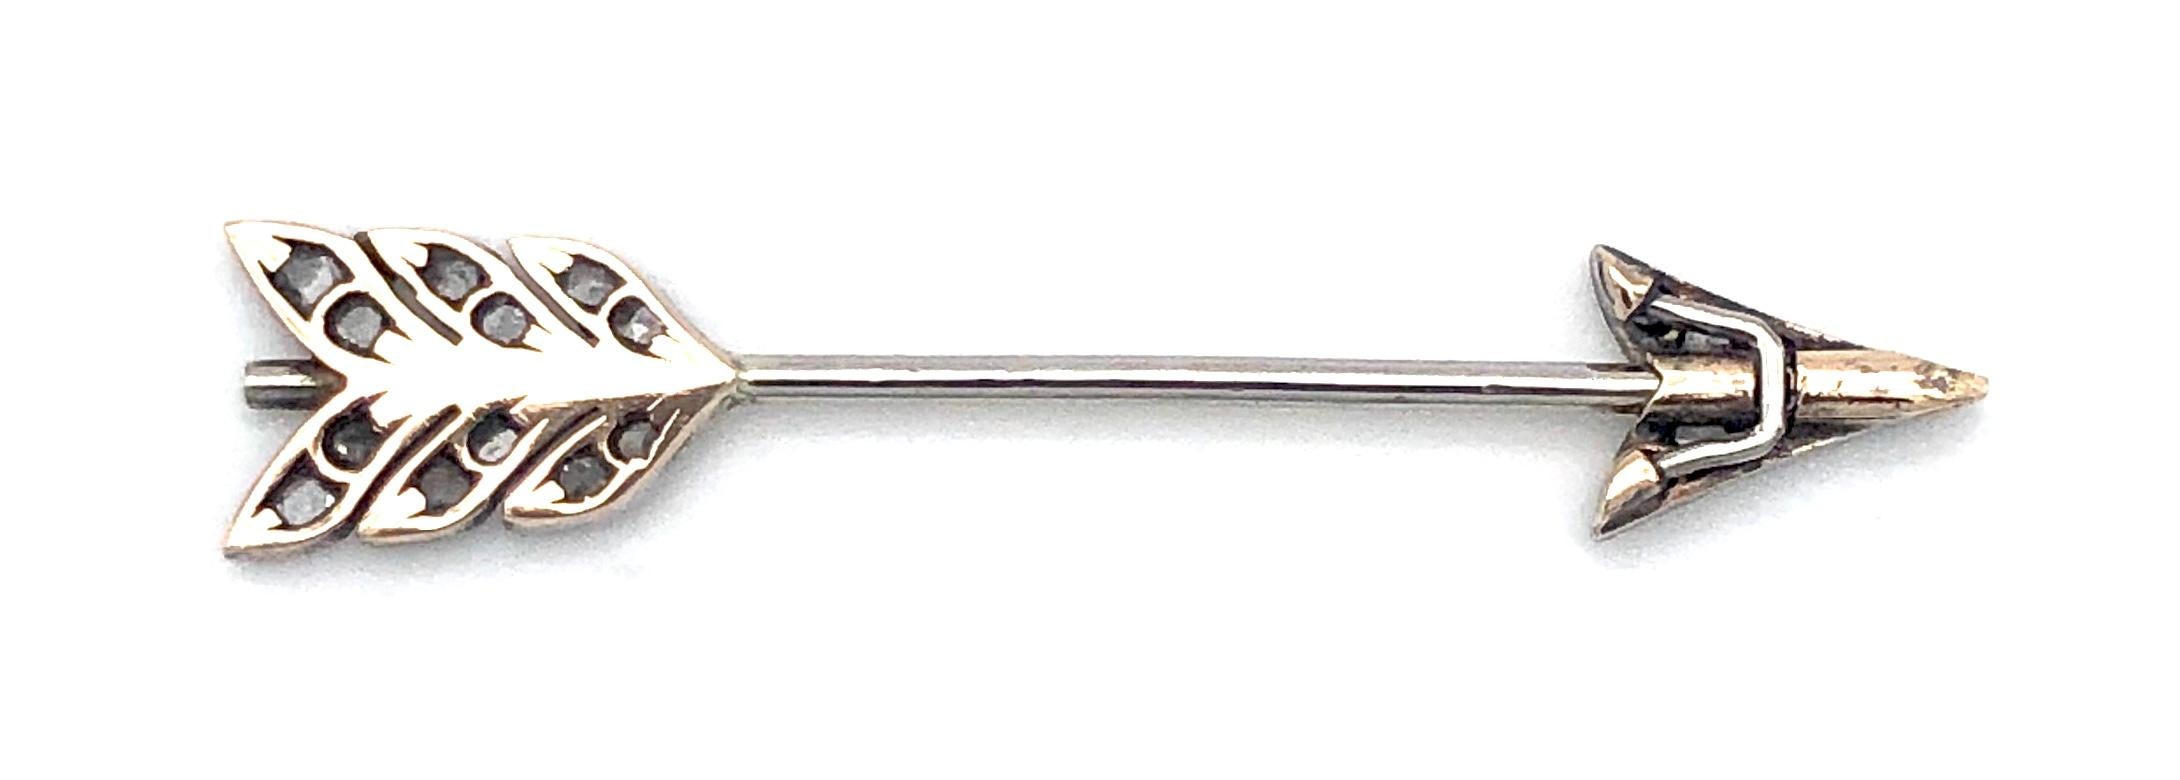 Delightful little jabot pin in the shape of cupids arrow. Arrow head and shaft are set with rose cut diamonds  mounted in platinum backed on gold. This amusing love token can be worn on a lapel, a scarve, a tie or a hat.